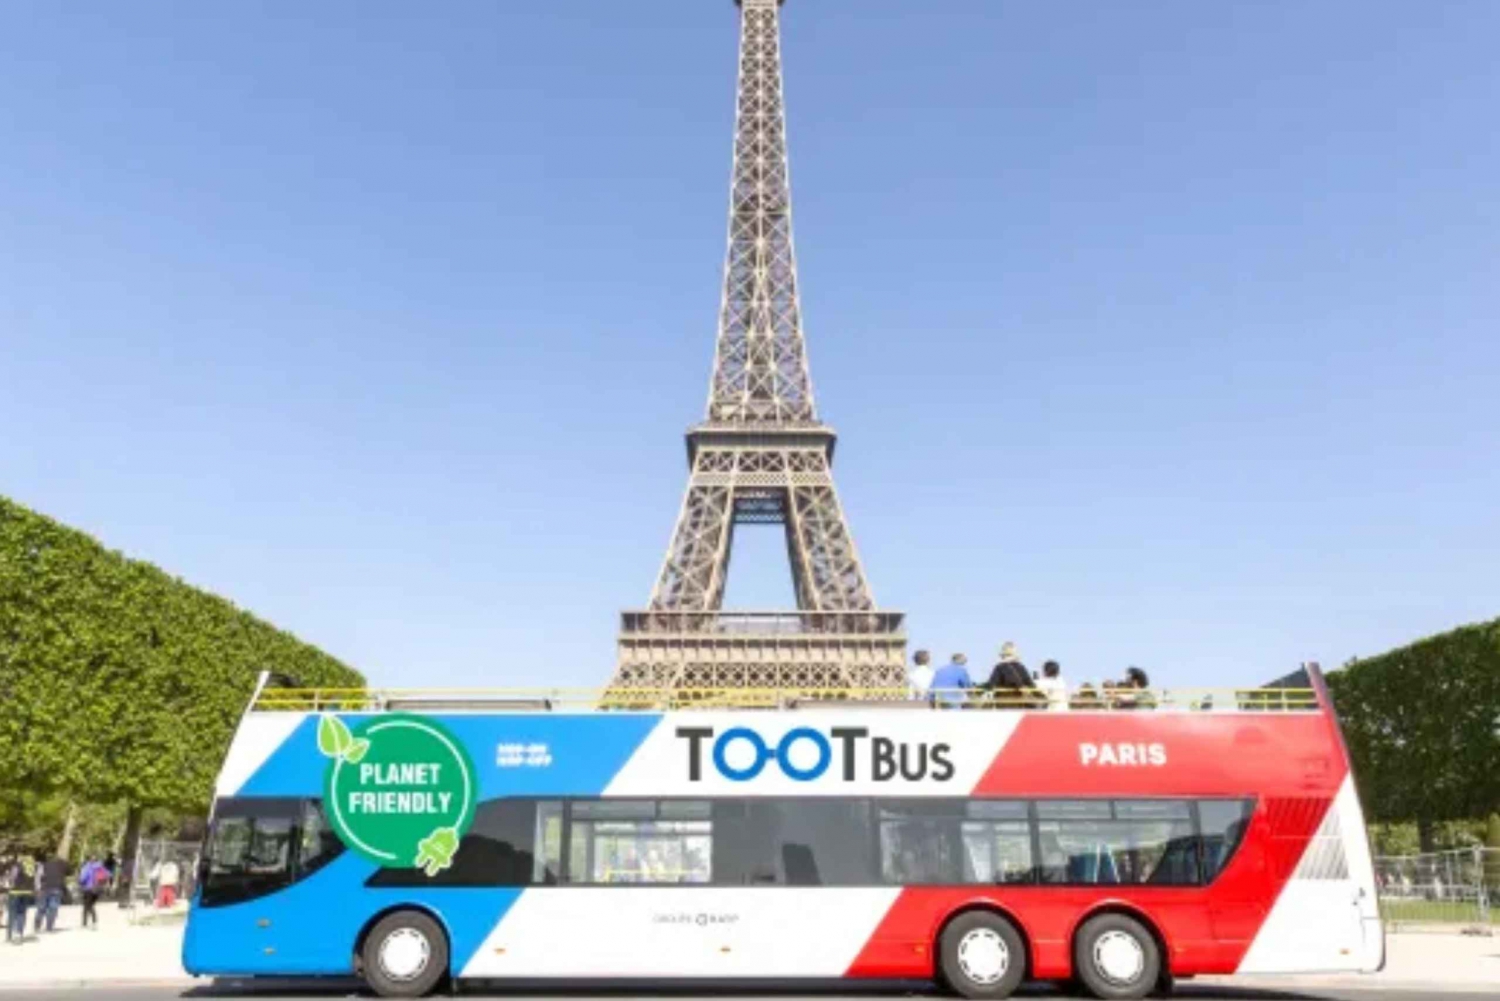 Paris Combo : Louvre Skip the Line and Hop on Hop off 1 day